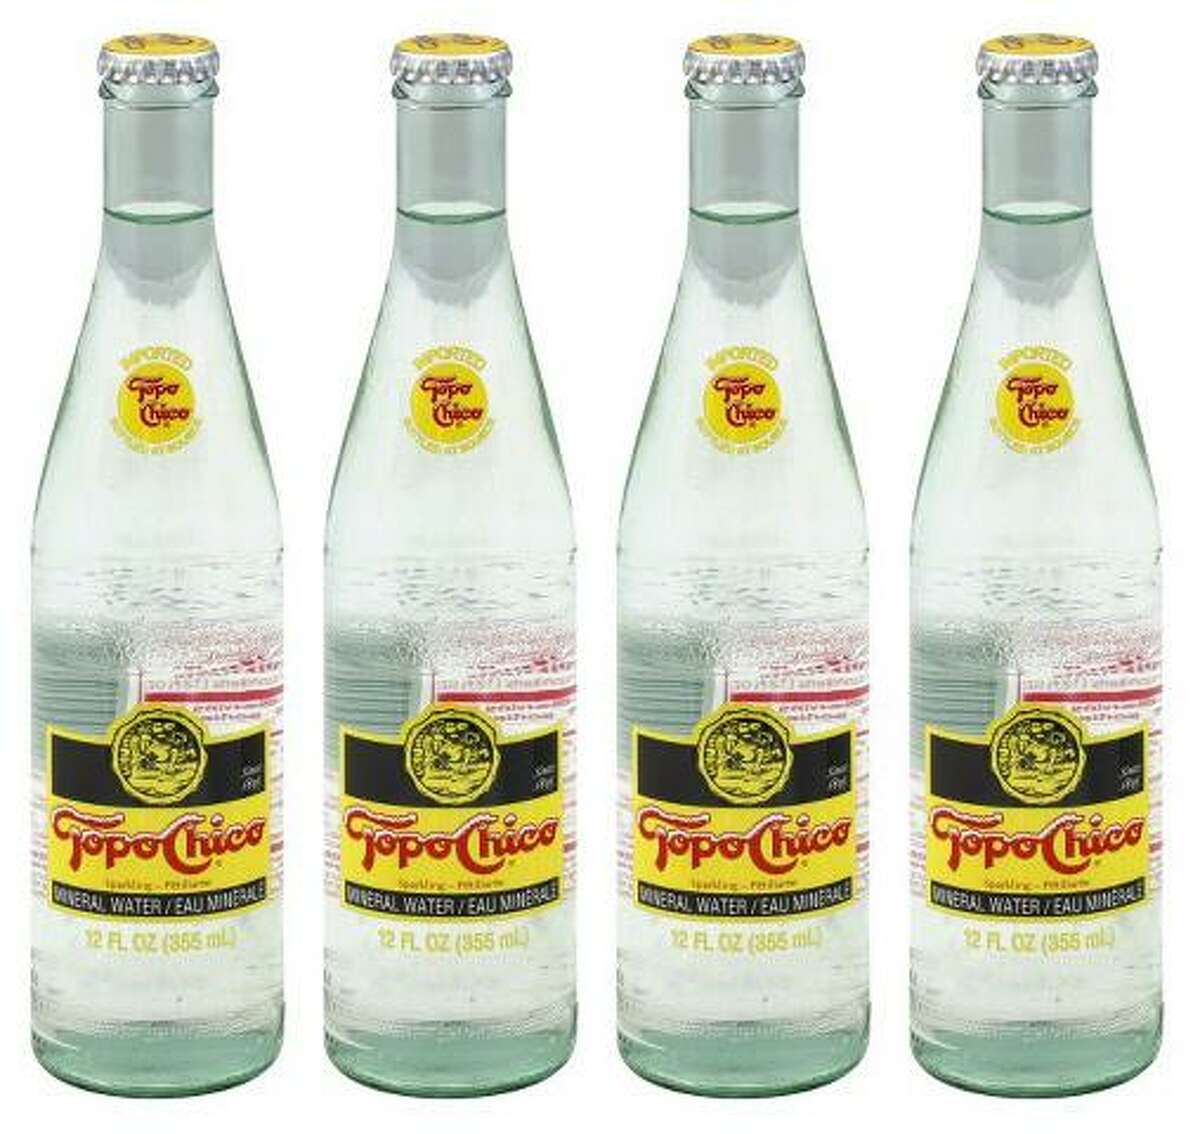 Bottles of Topo Chico mineral water